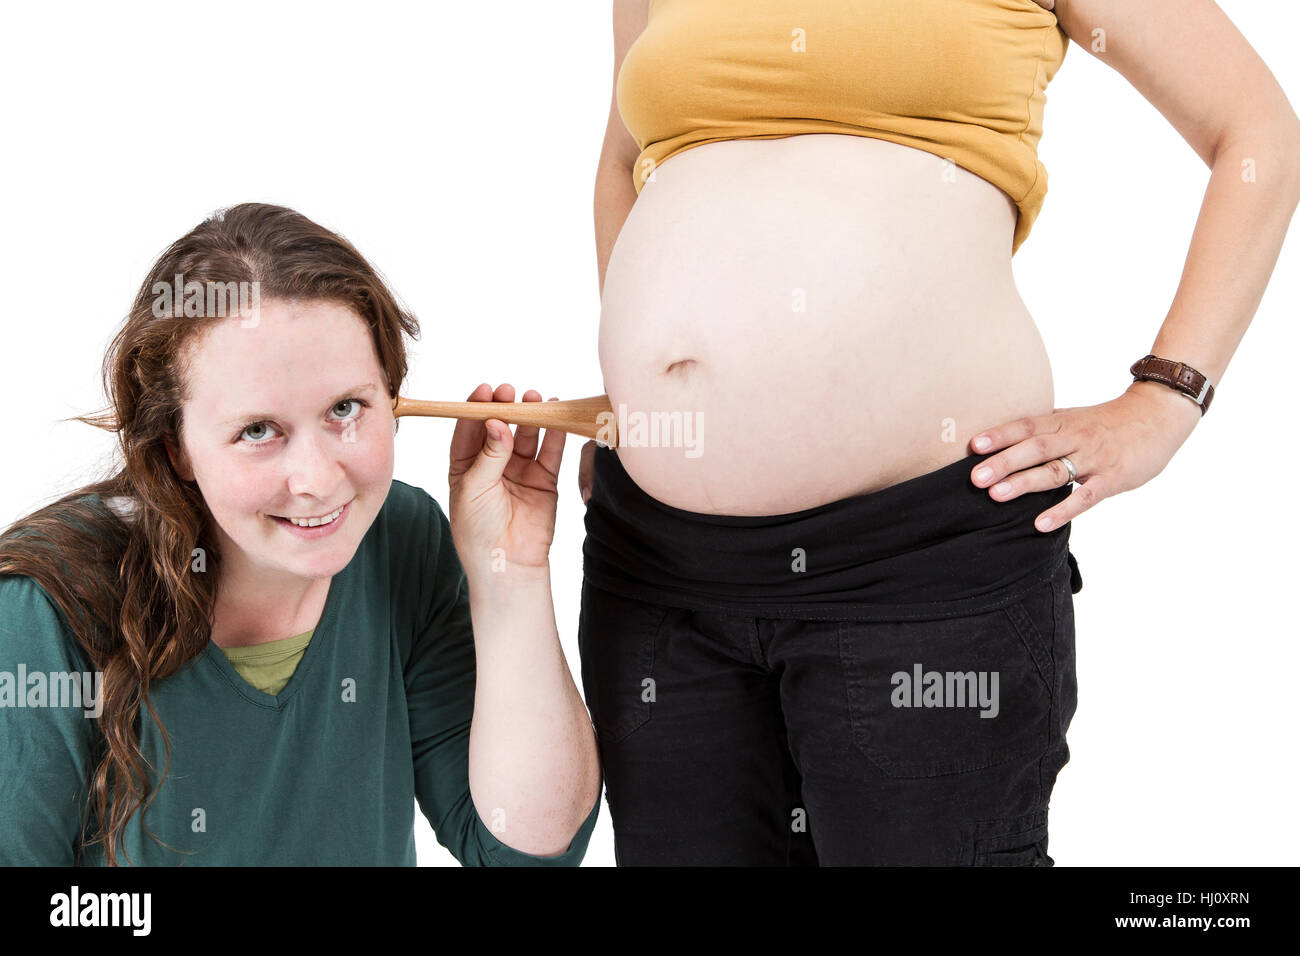 woman, pregnancy, pregnant, gestation, midwife, doctor, physician, medic, Stock Photo